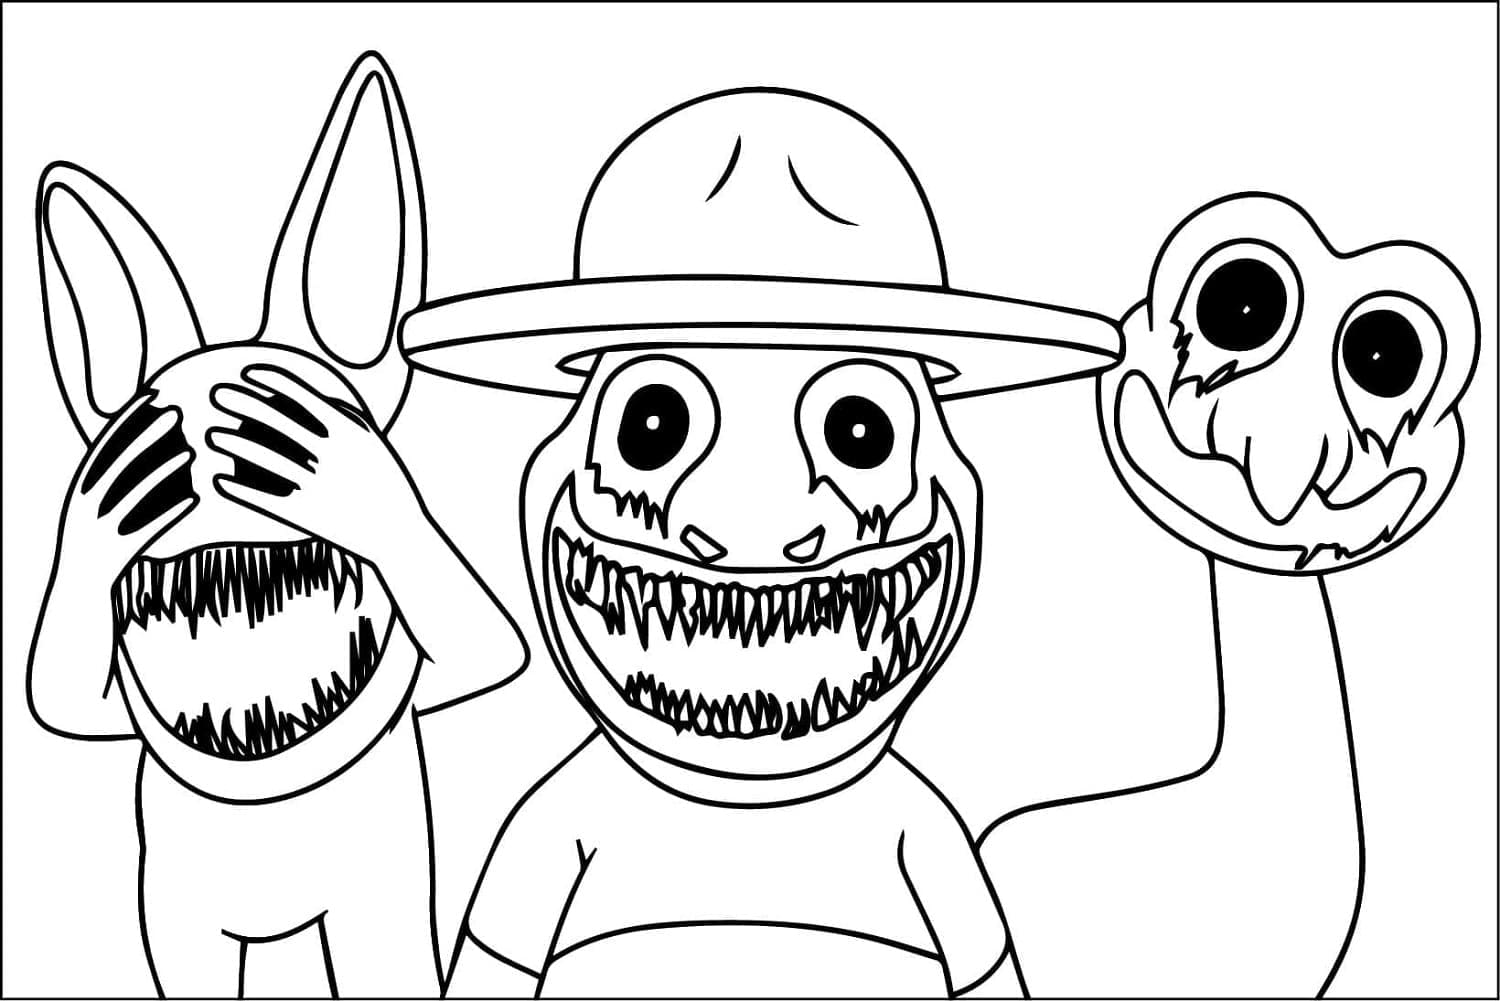 Printable Zoonomaly Characters Coloring Page